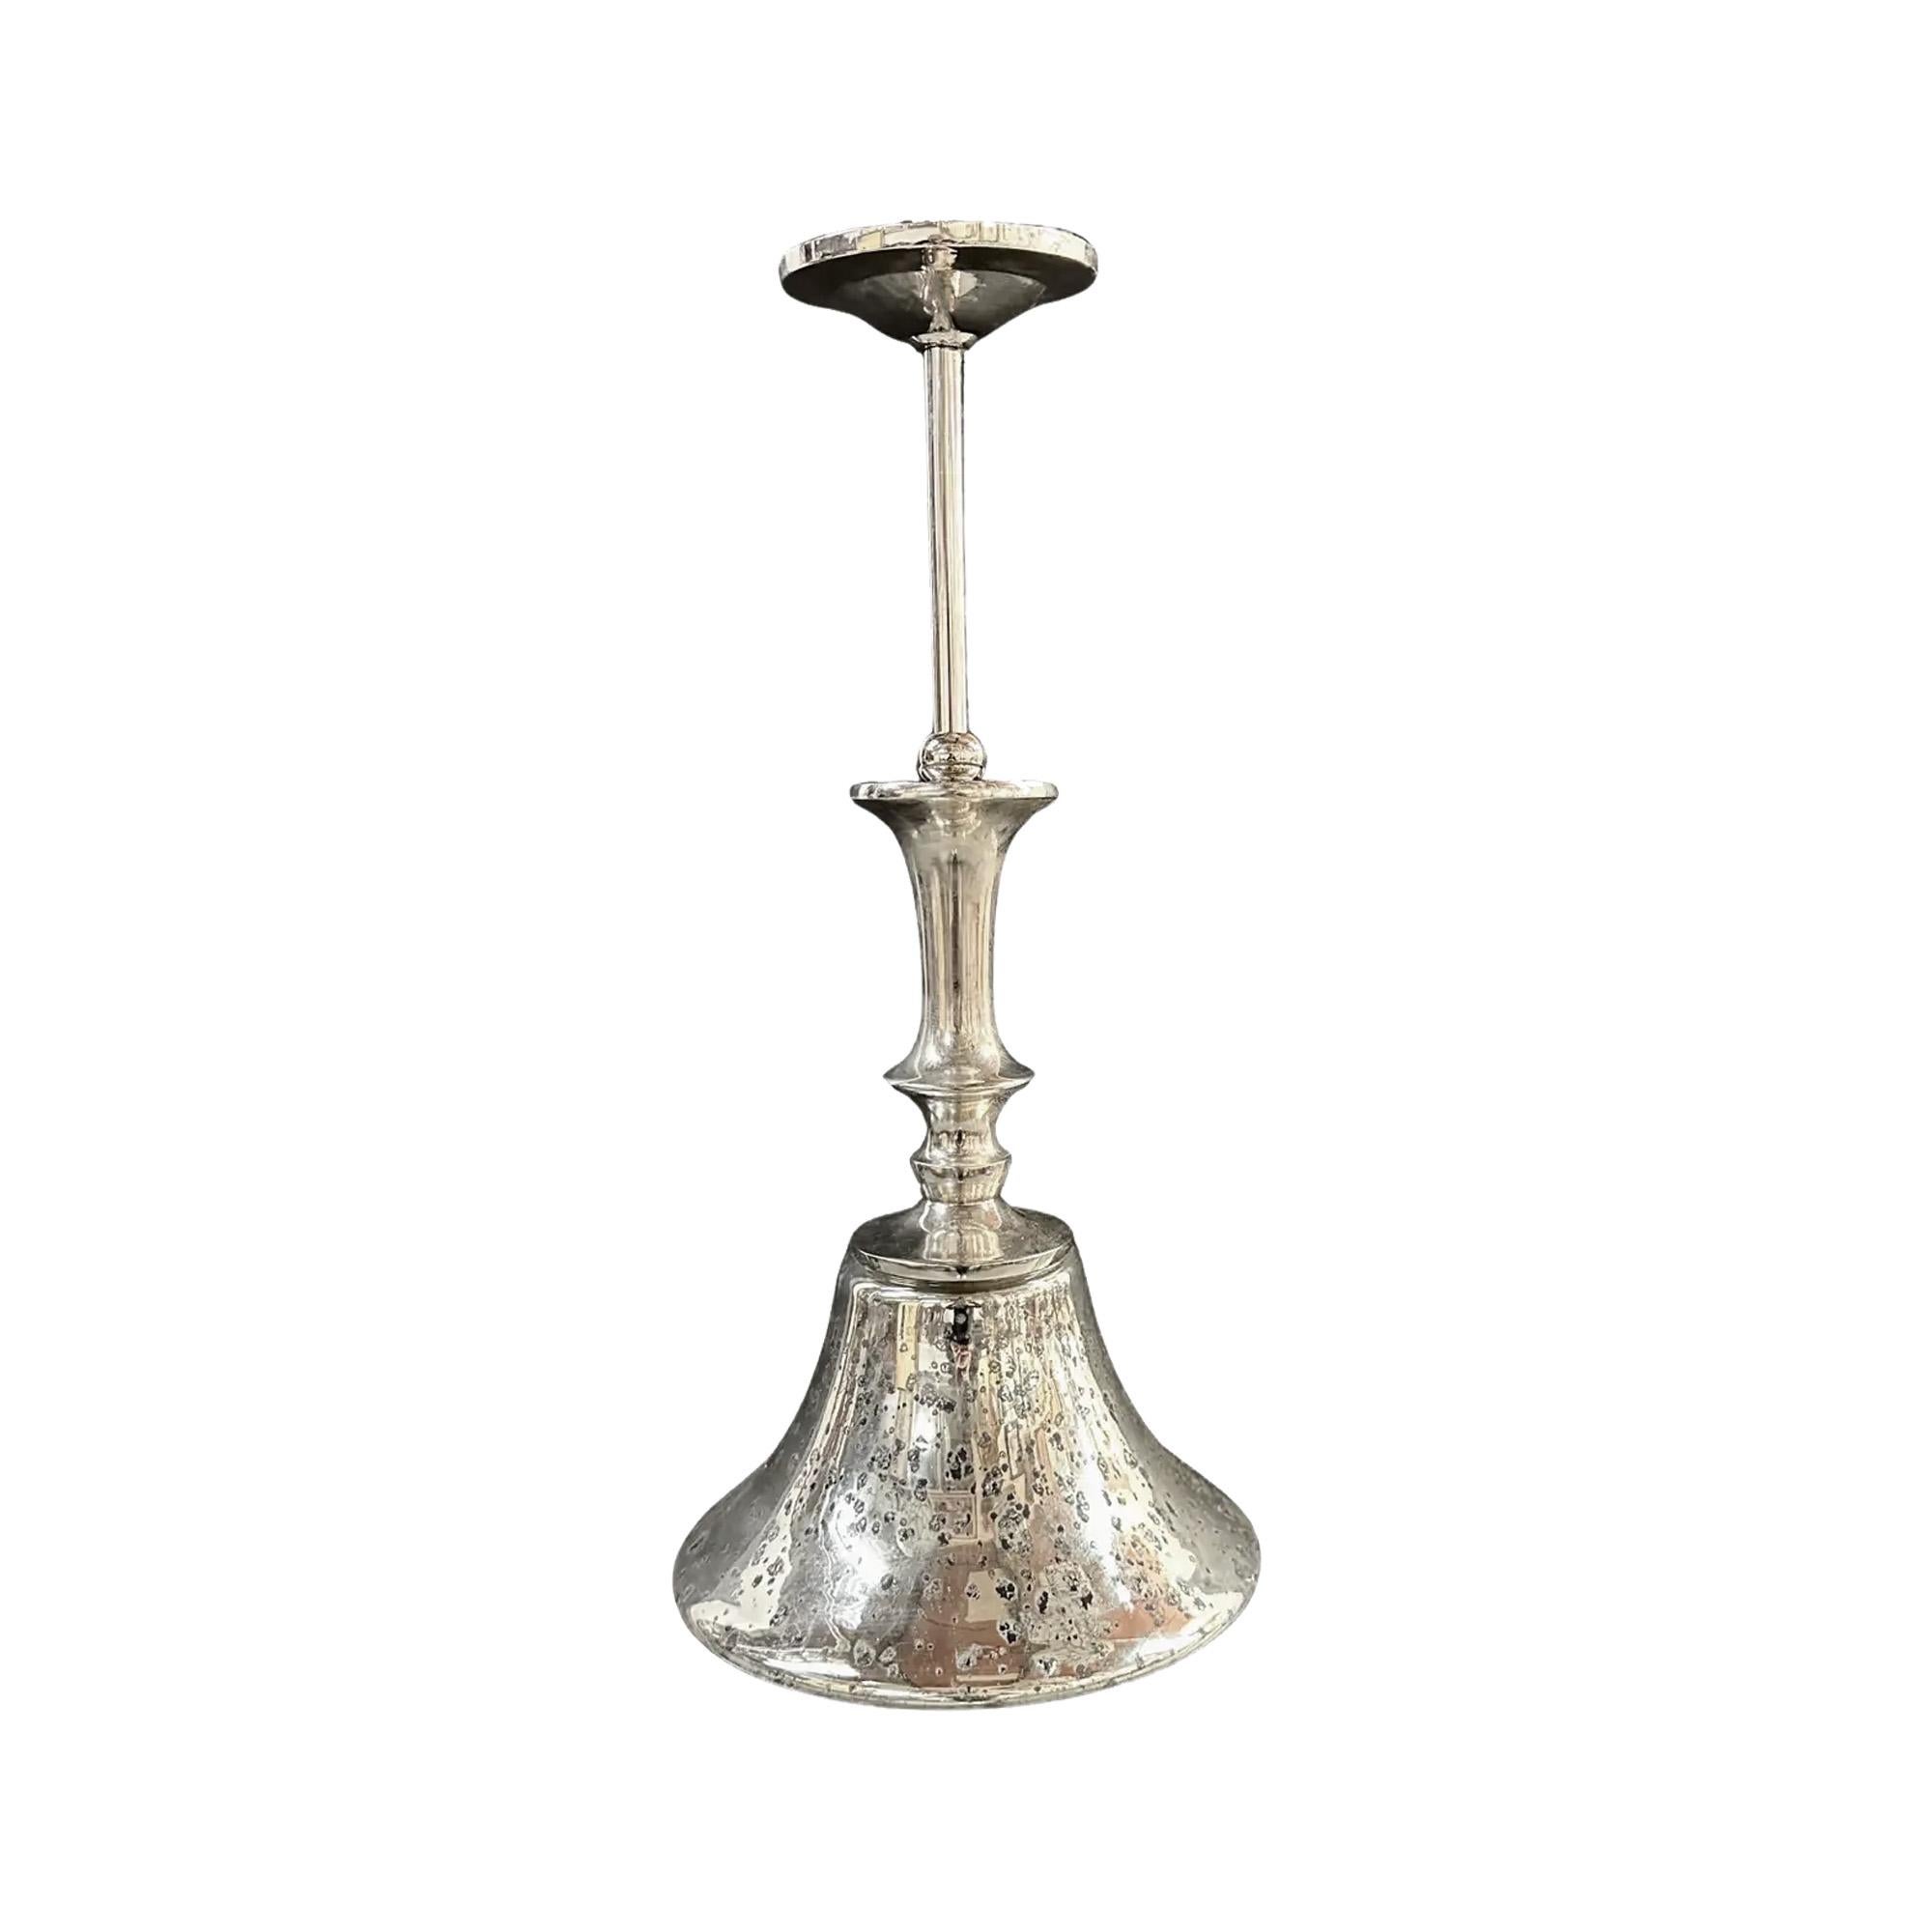 Introducing an exquisite set of 5 Post-Modern Cone Silver Pendants designed with an enchanting antiqued finish. This stunning pieces feature a unique design where the conical shade gracefully suspends from a long, lobed column, creating an